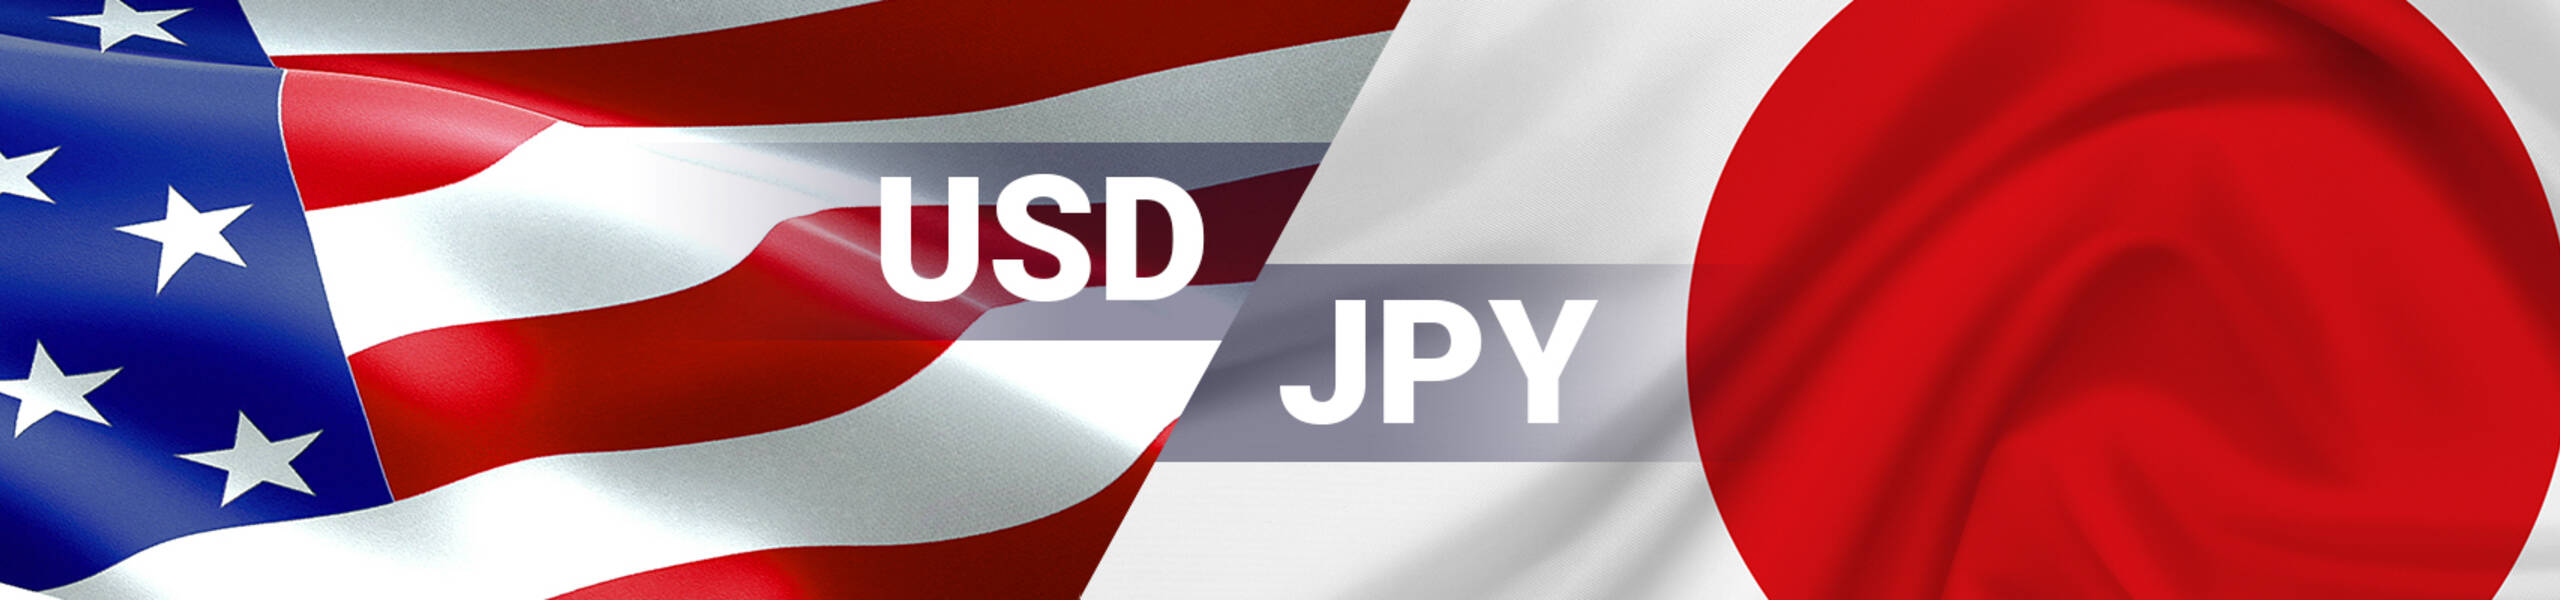 USD/JPY reversed from multi-month resistance level 114.40